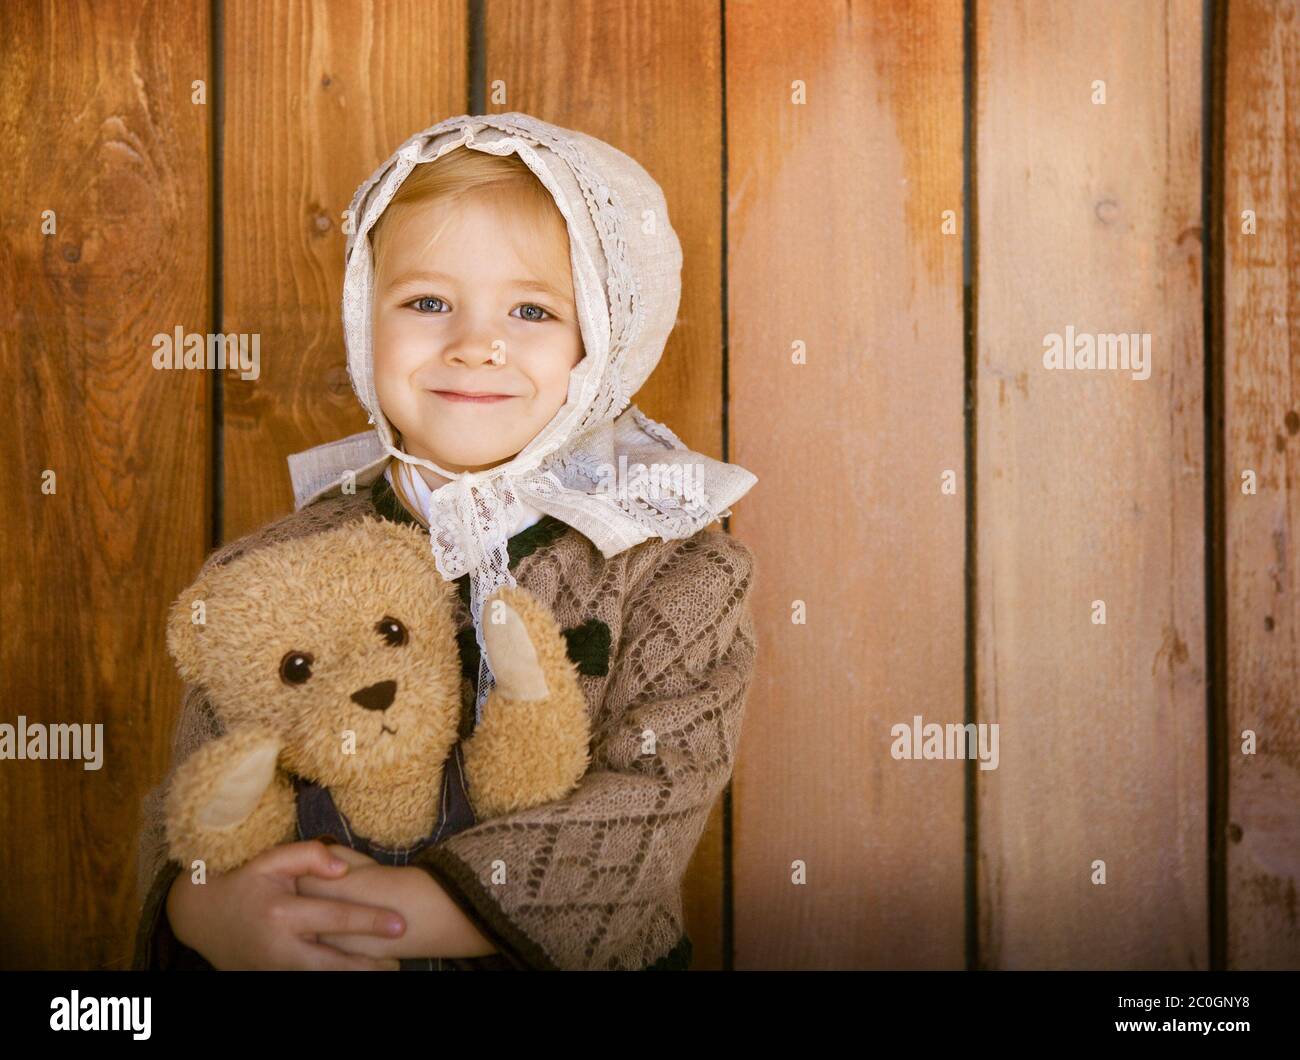 Portrait of the little smiling girl wering vintage clothes with toy bear Stock Photo